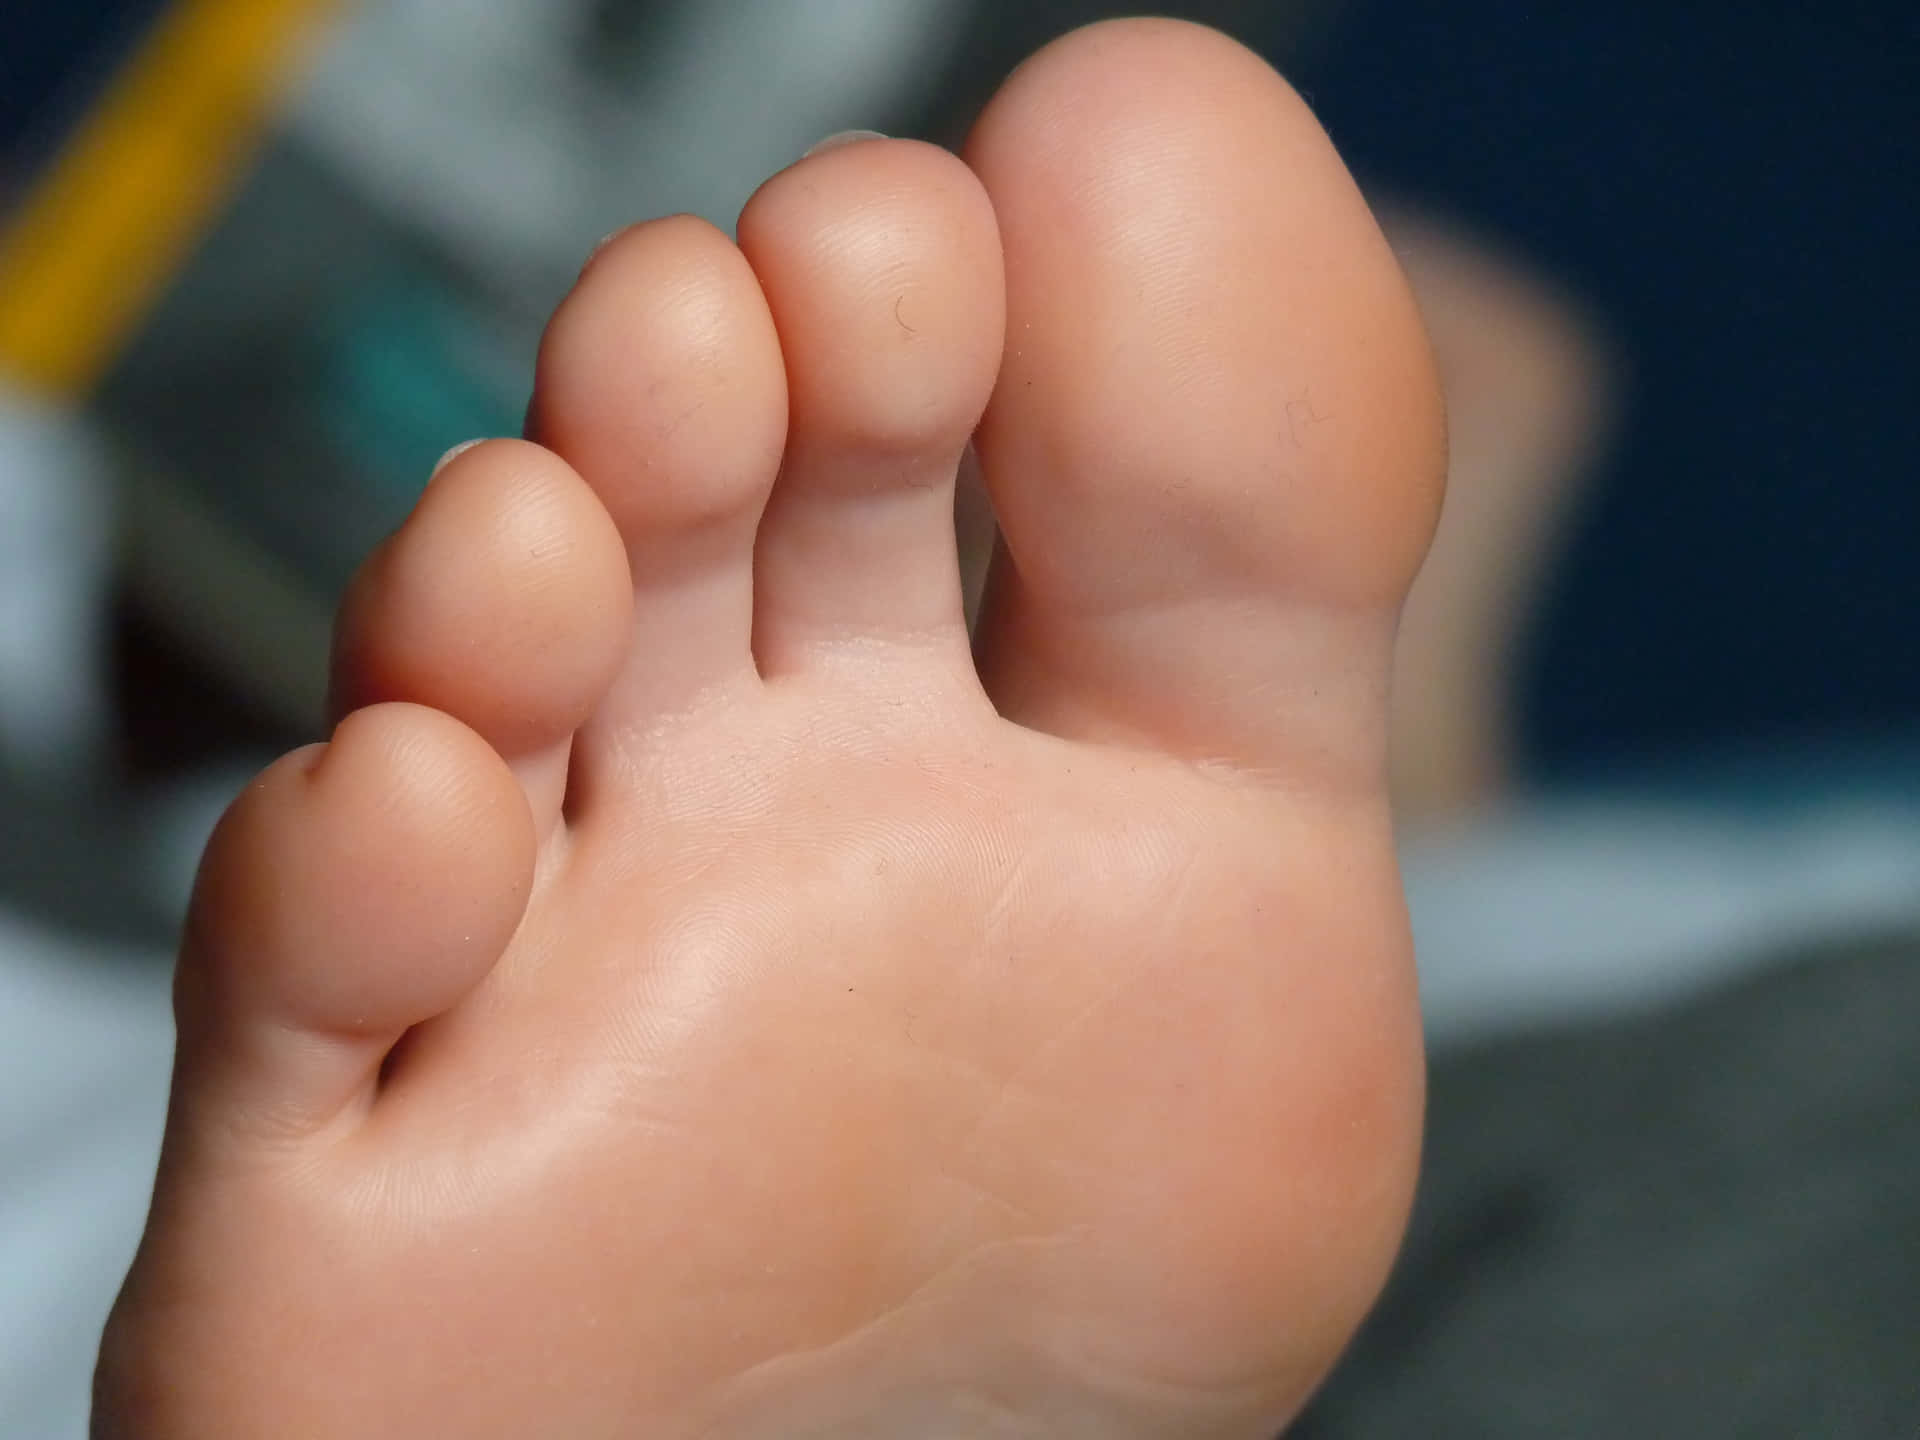 Foot Pictures